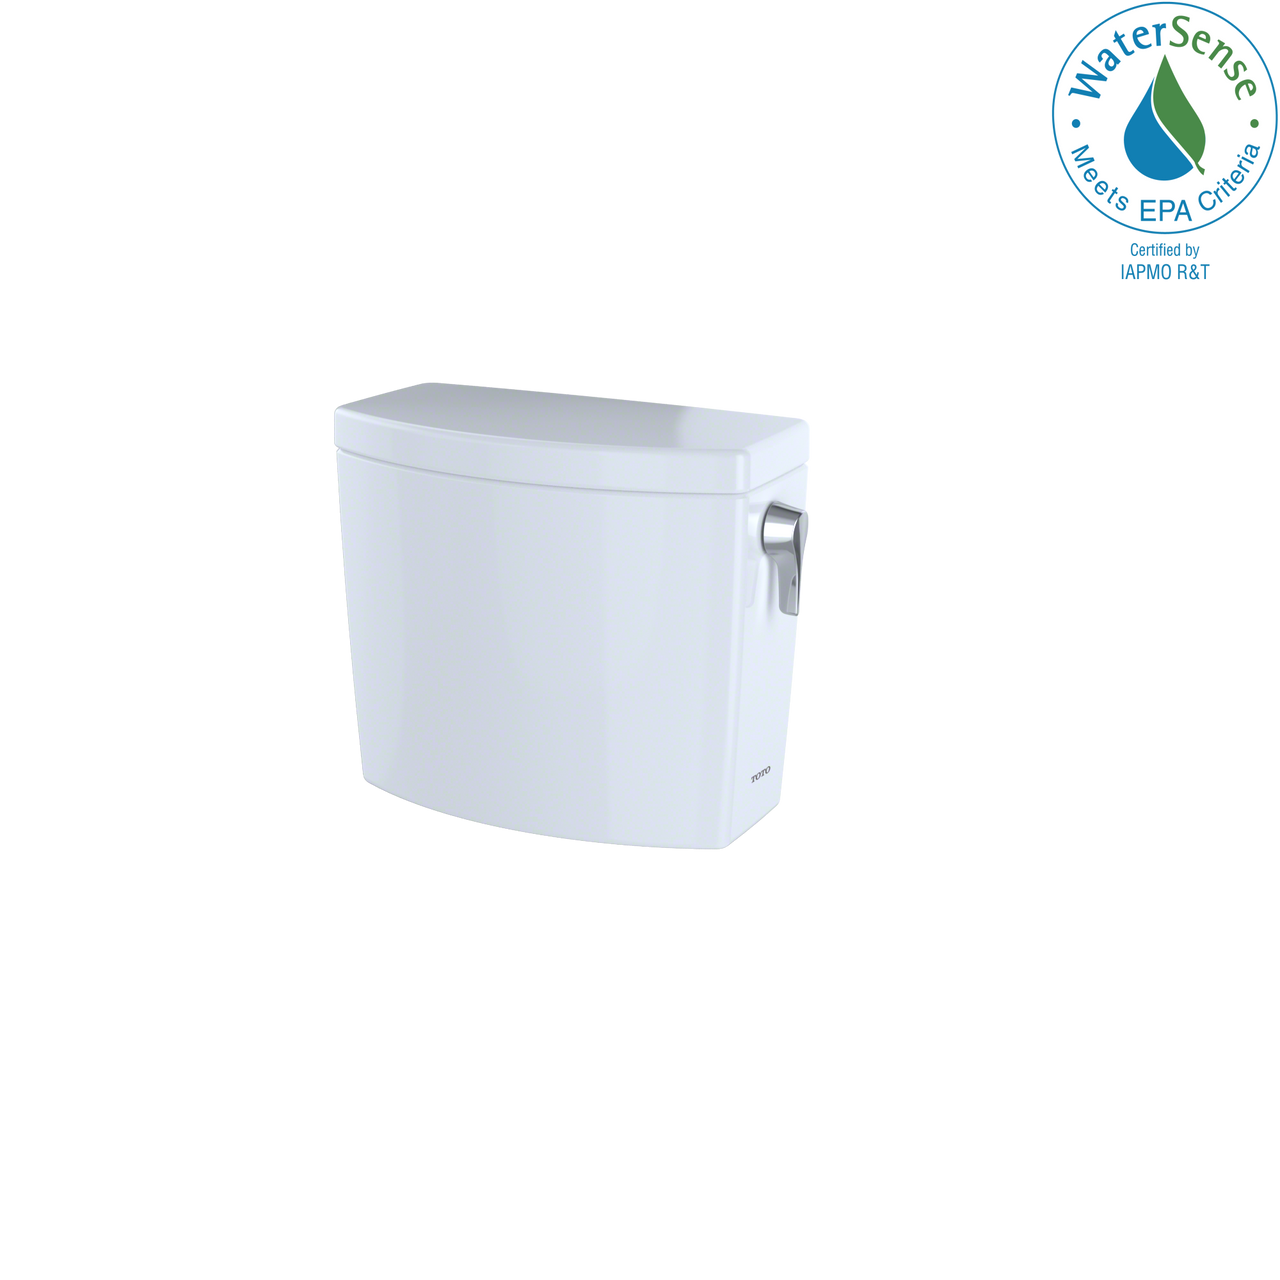 TOTO Drake II 1G and Vespin II 1G, 1.0 GPF Toilet Tank with Right-Hand Trip Lever,  - ST453UR#01 - BNGBath